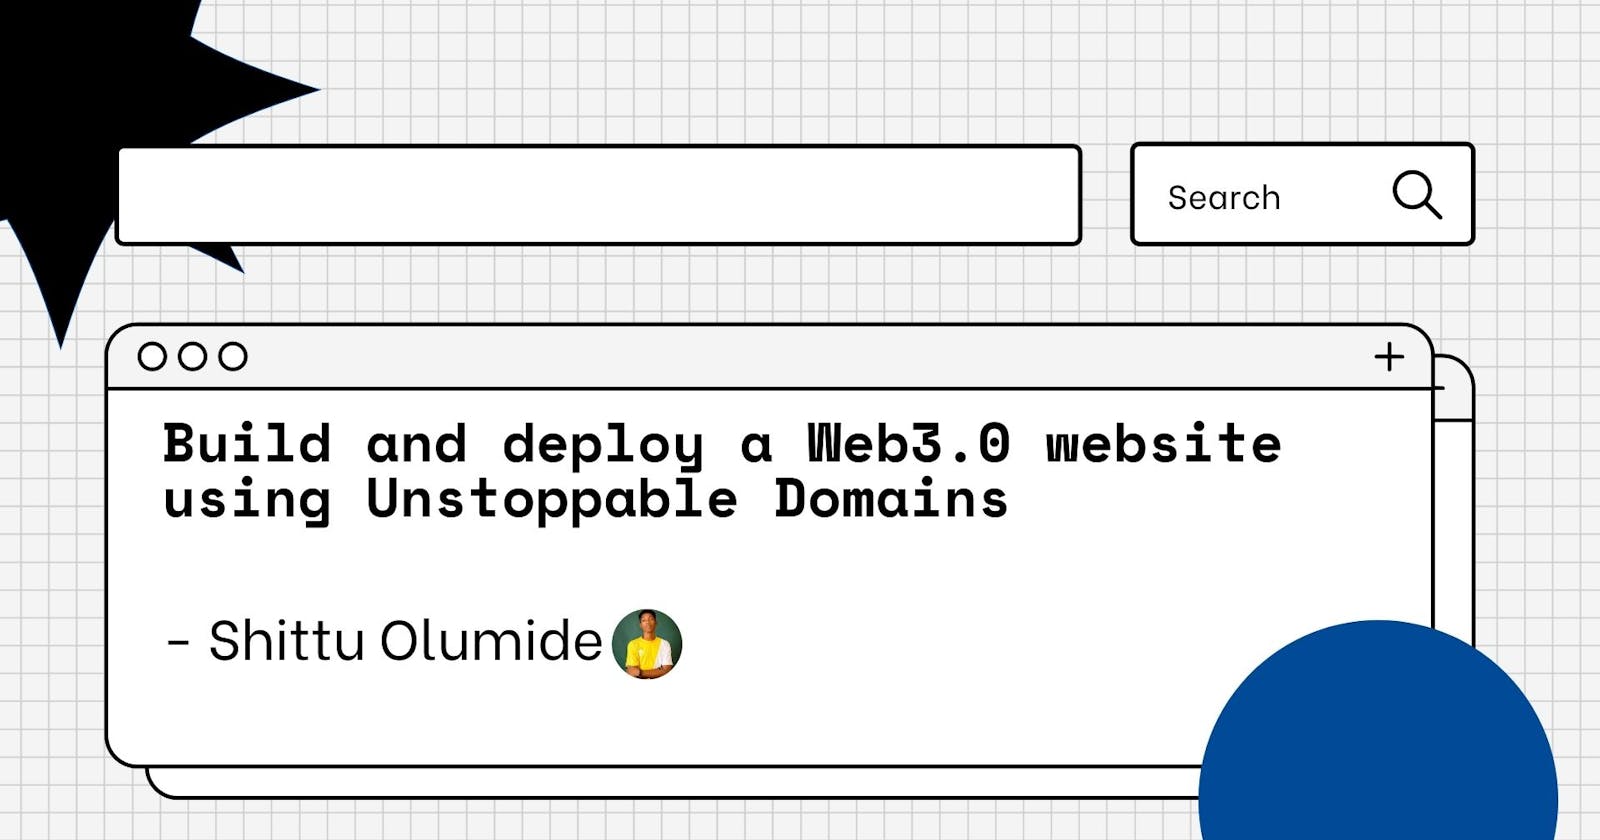 Build and deploy a Web3.0 website using Unstoppable Domains